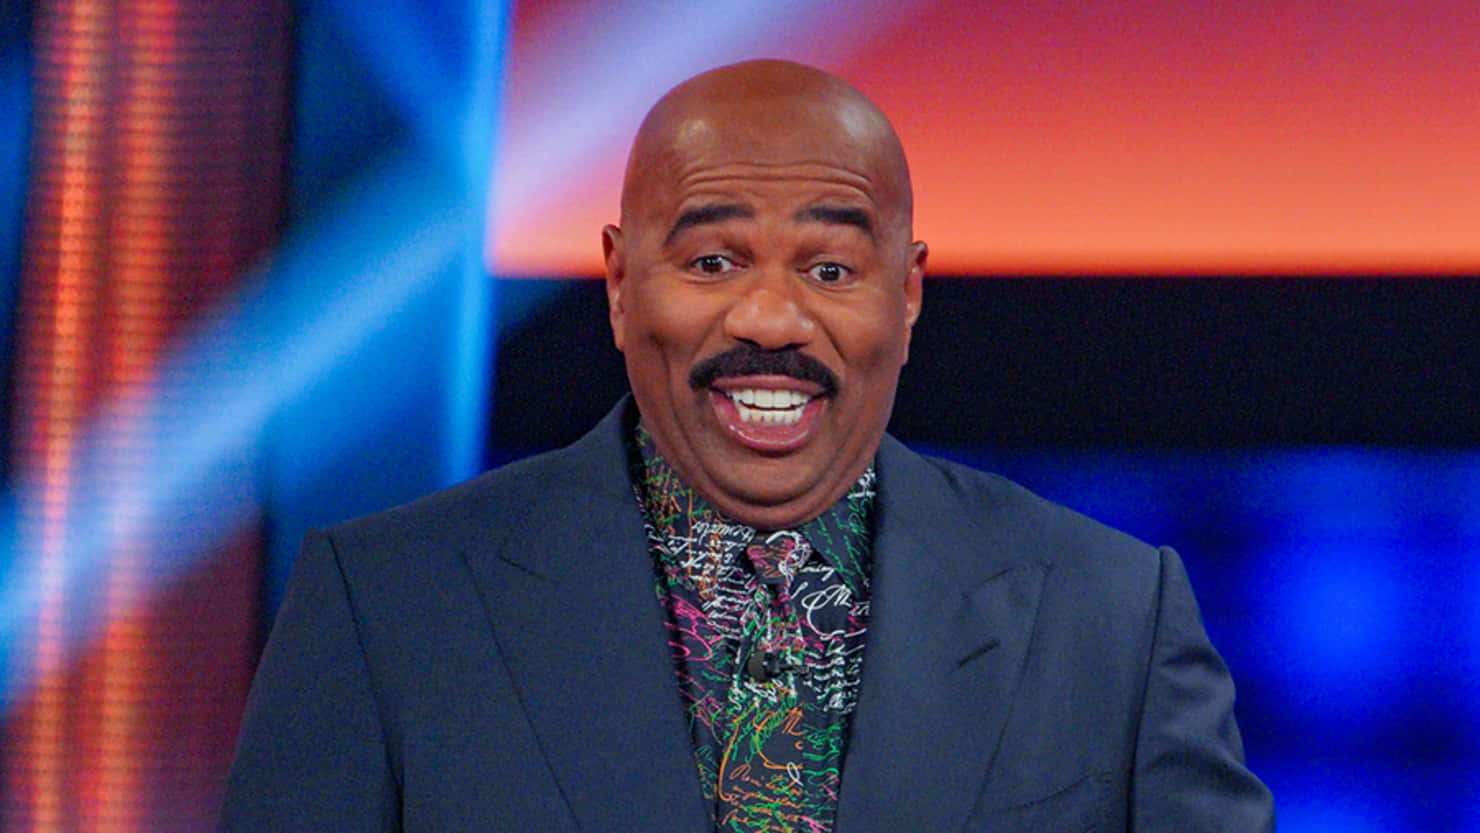 Steve Harvey Smiling In A Colorful Shirt Wallpaper